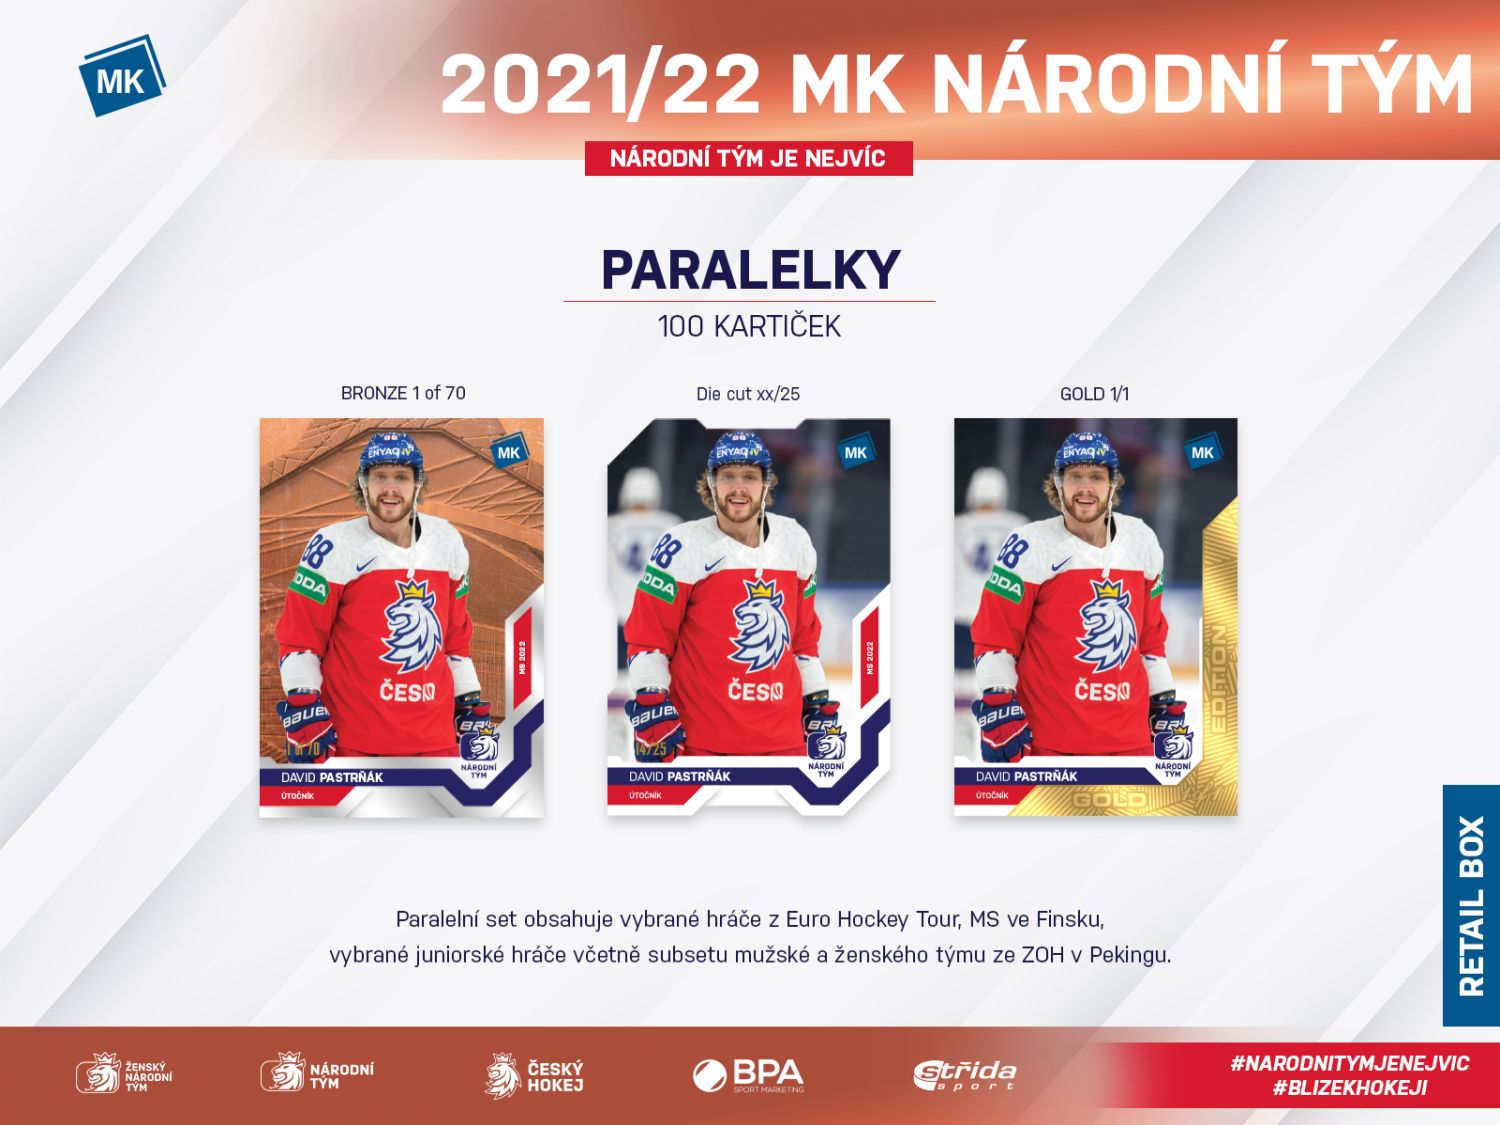 PARALELKY